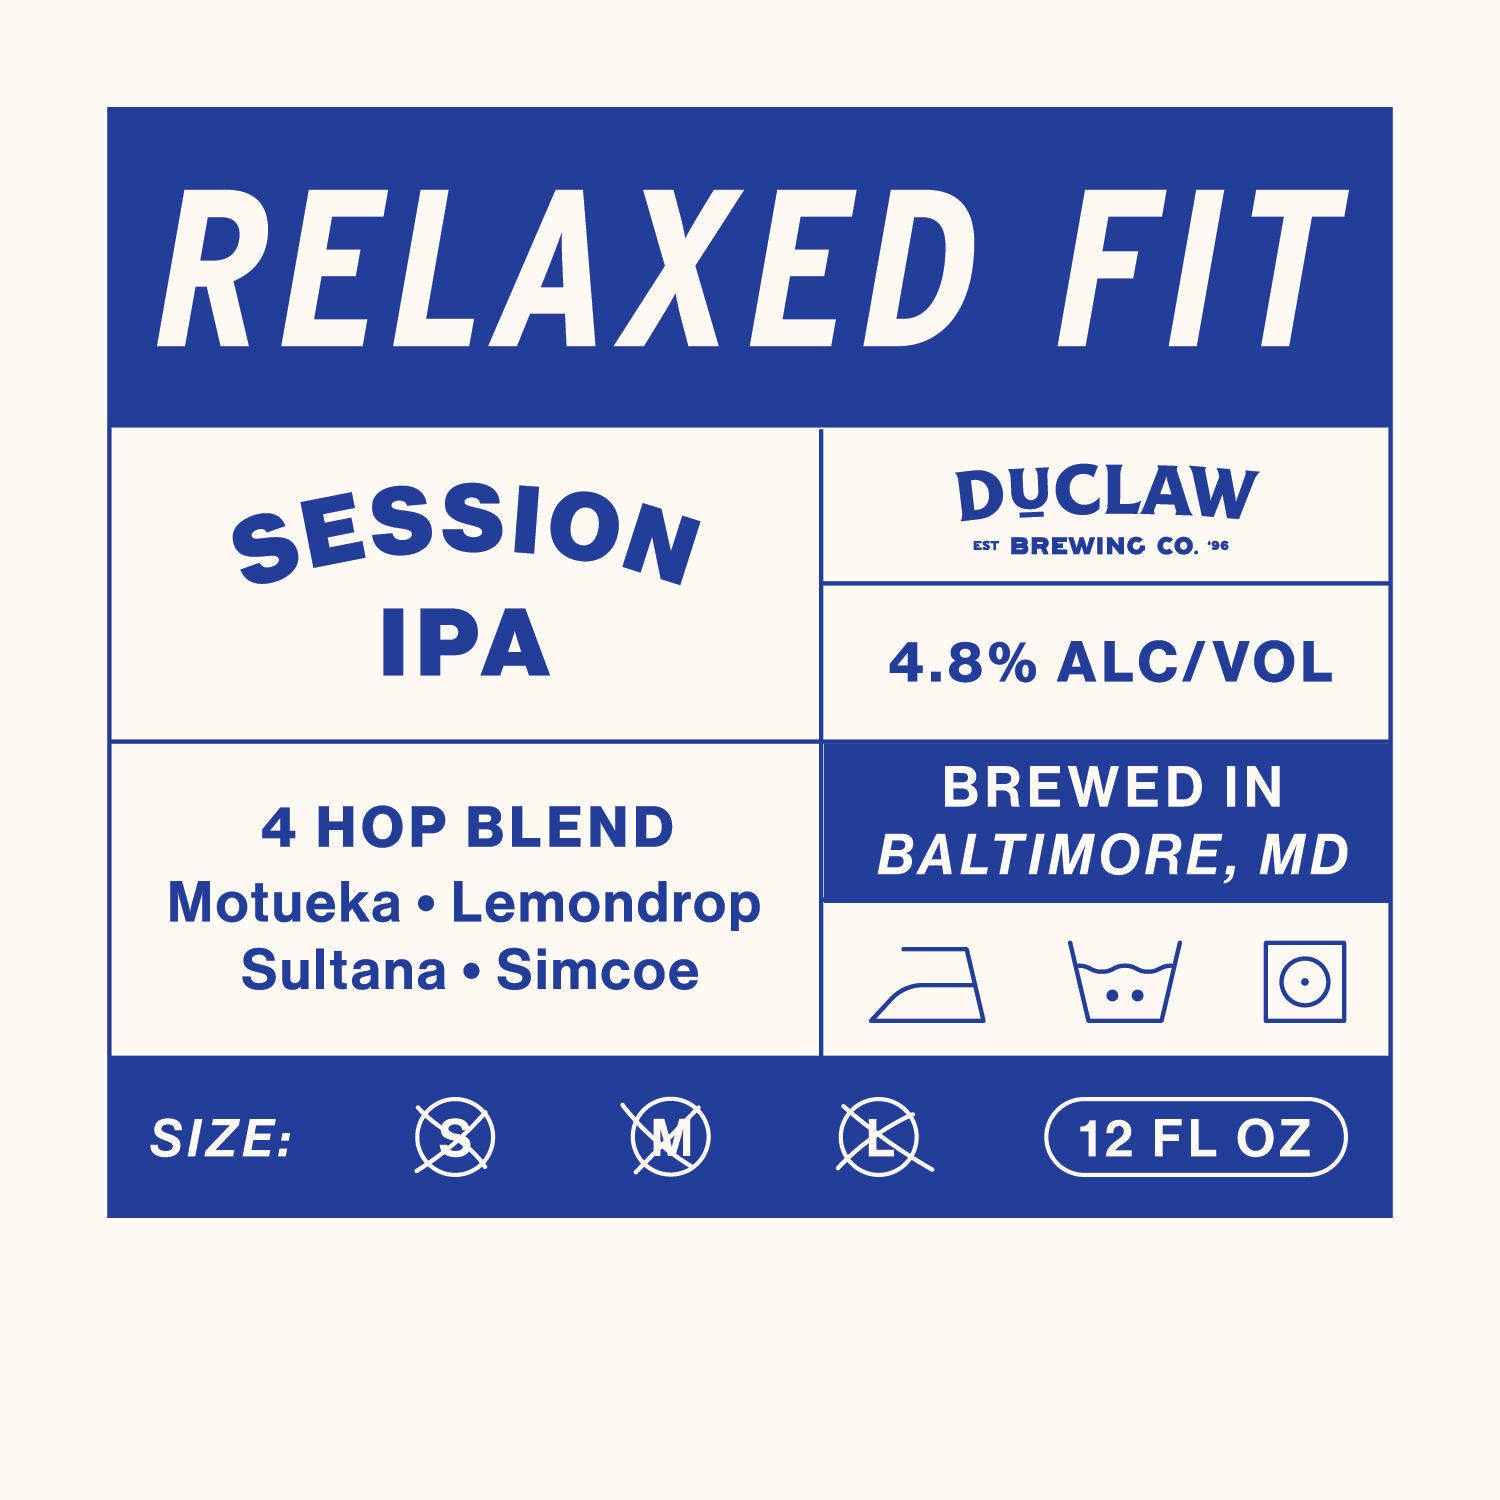 Relaxed Fit logo